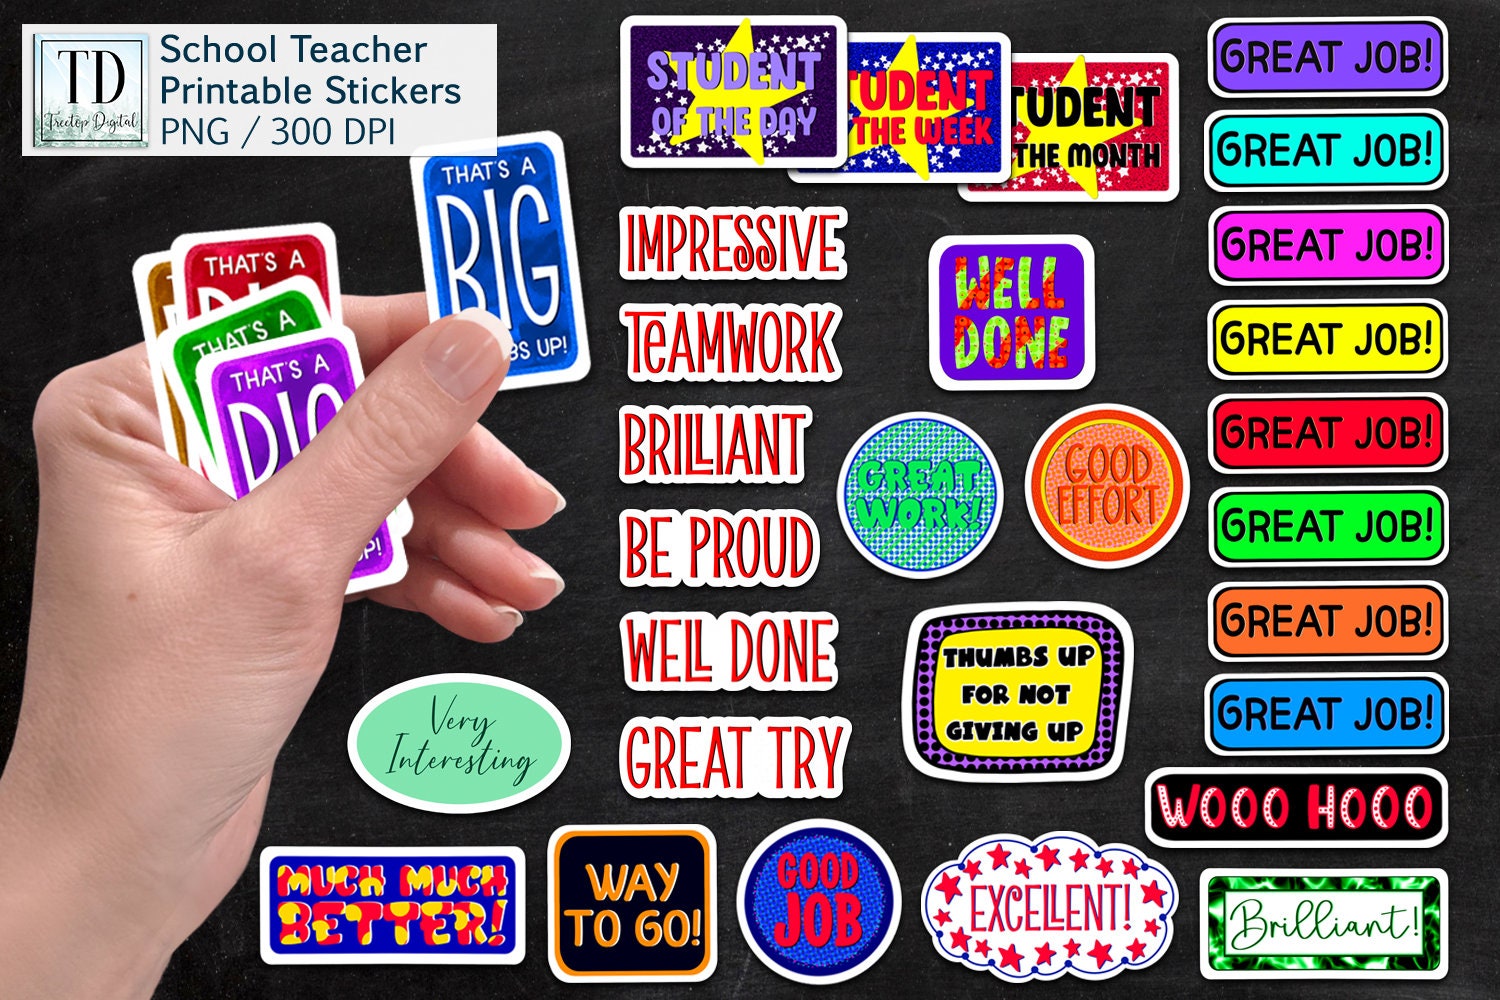 Great Job Super Star Colored Glossy Stickers for Students, Teachers &  Classrooms